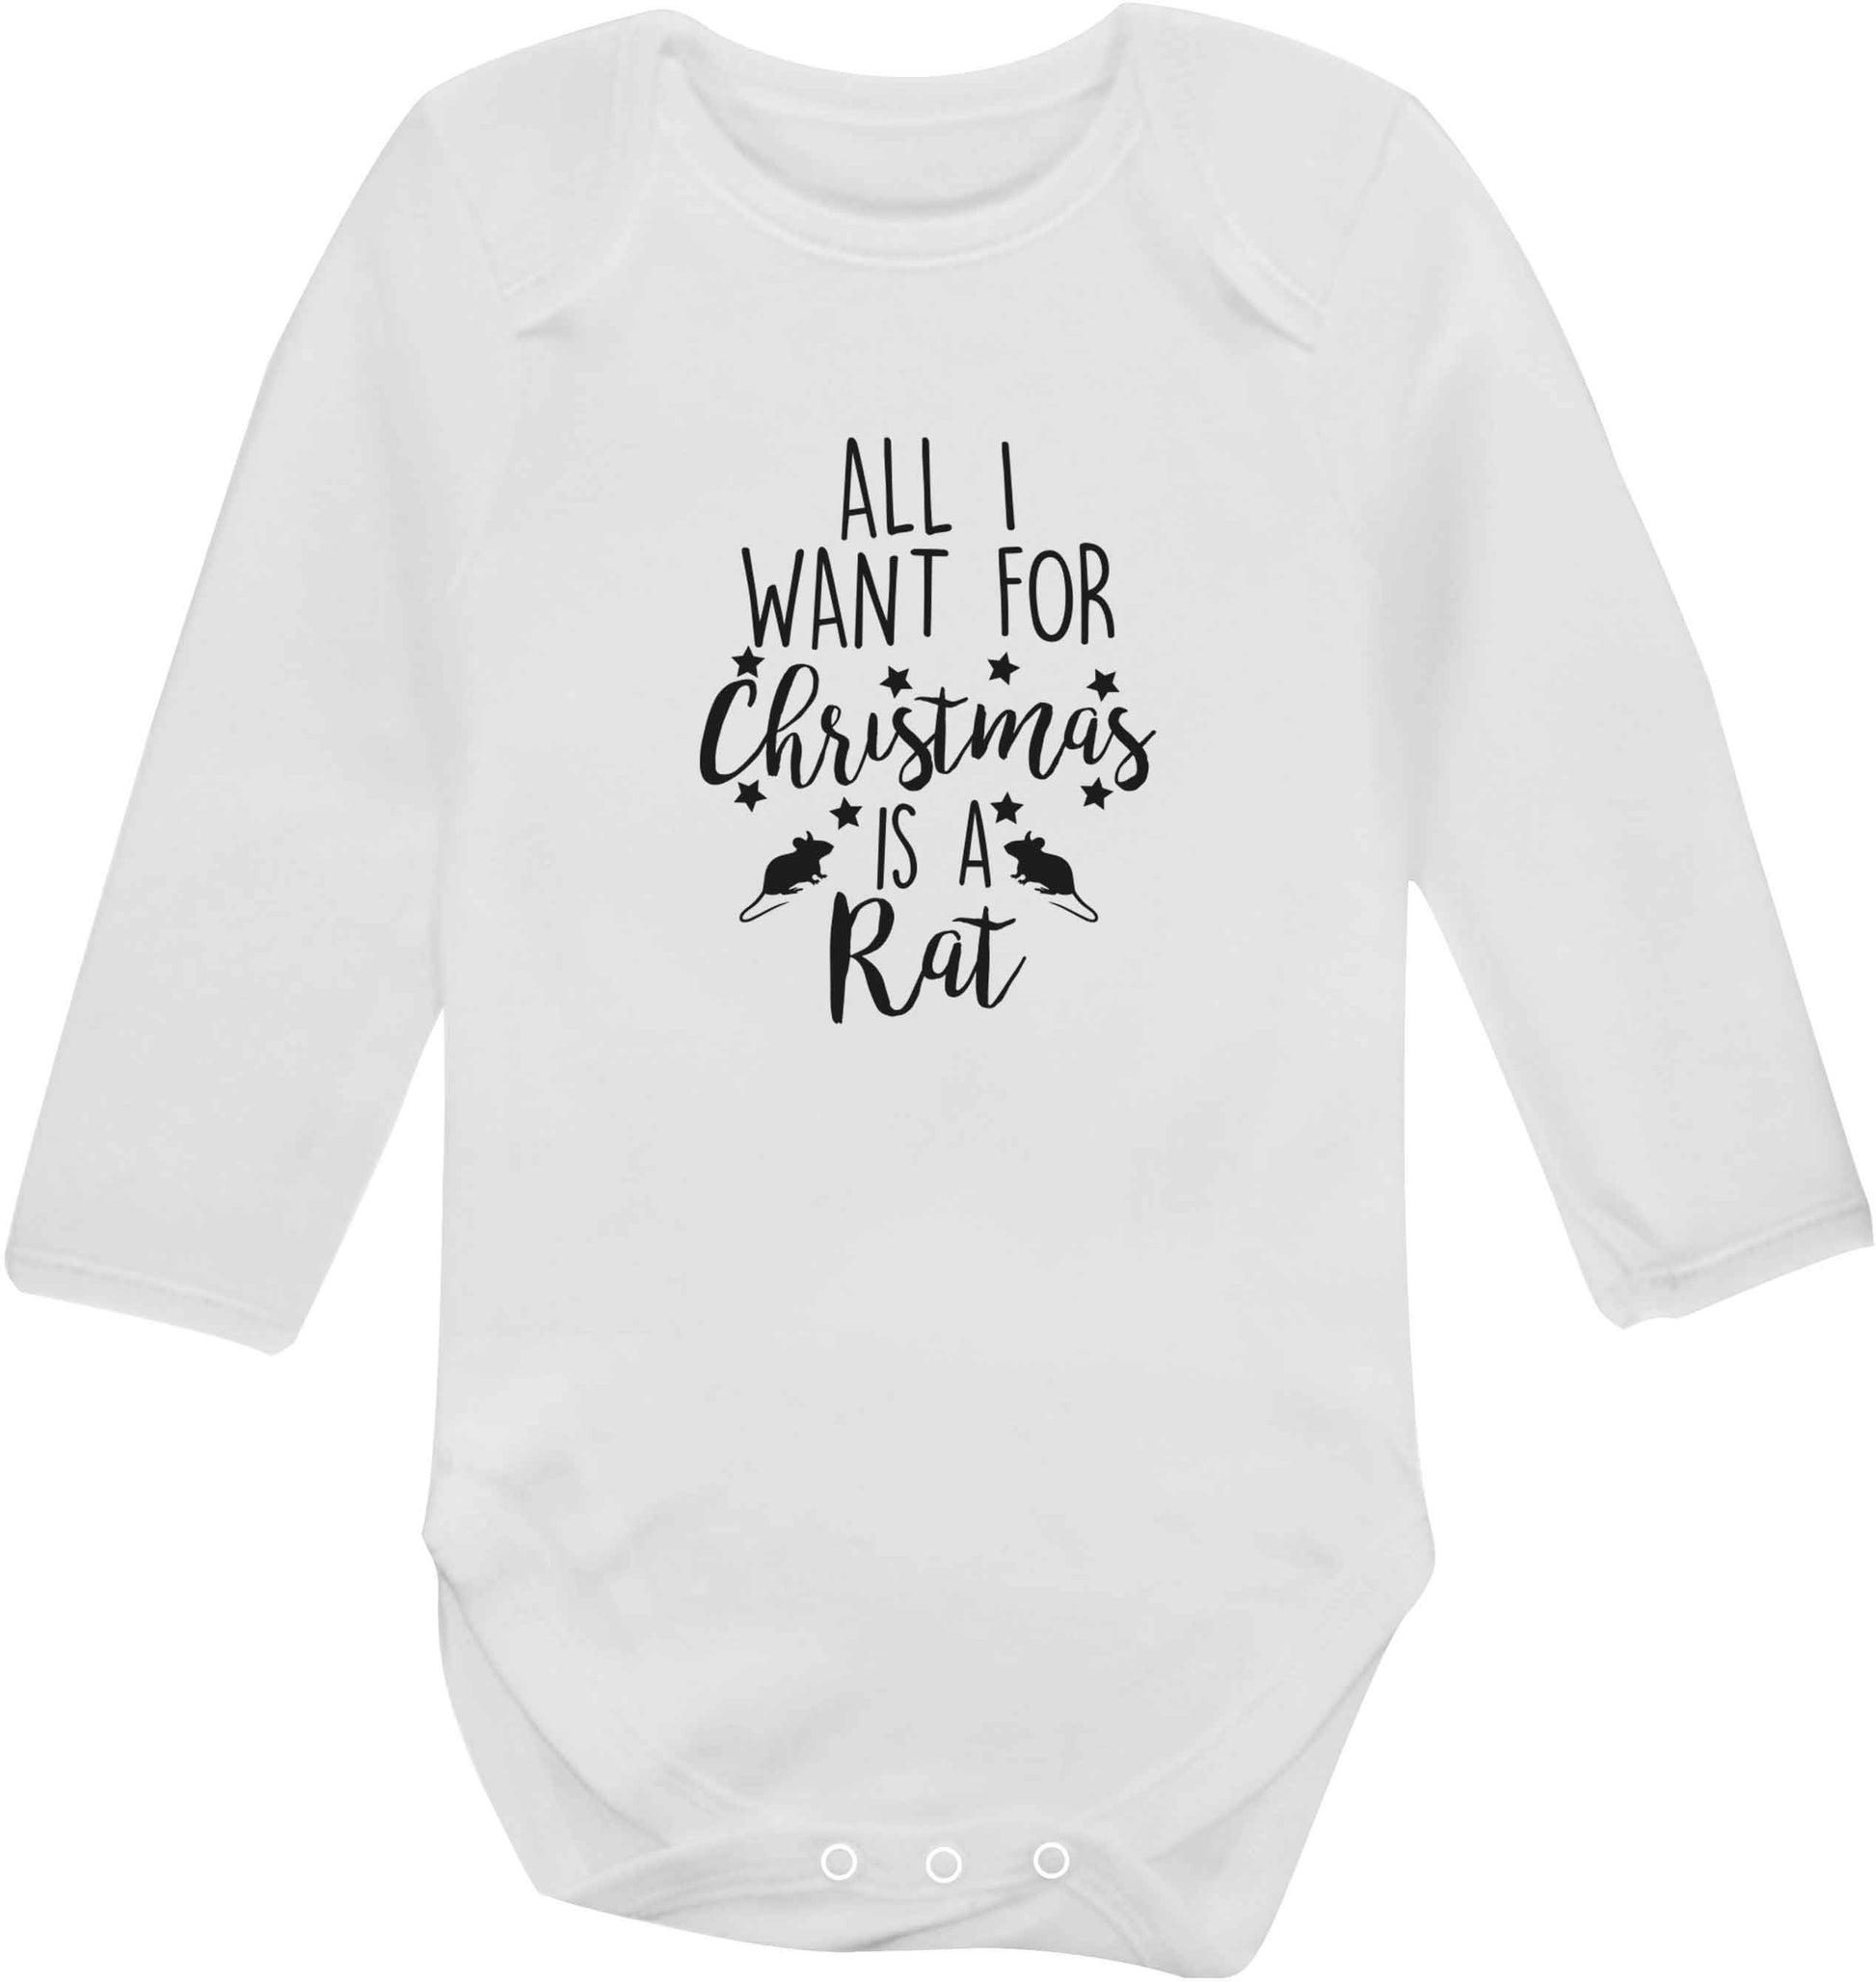 All I want for Christmas is a rat baby vest long sleeved white 6-12 months